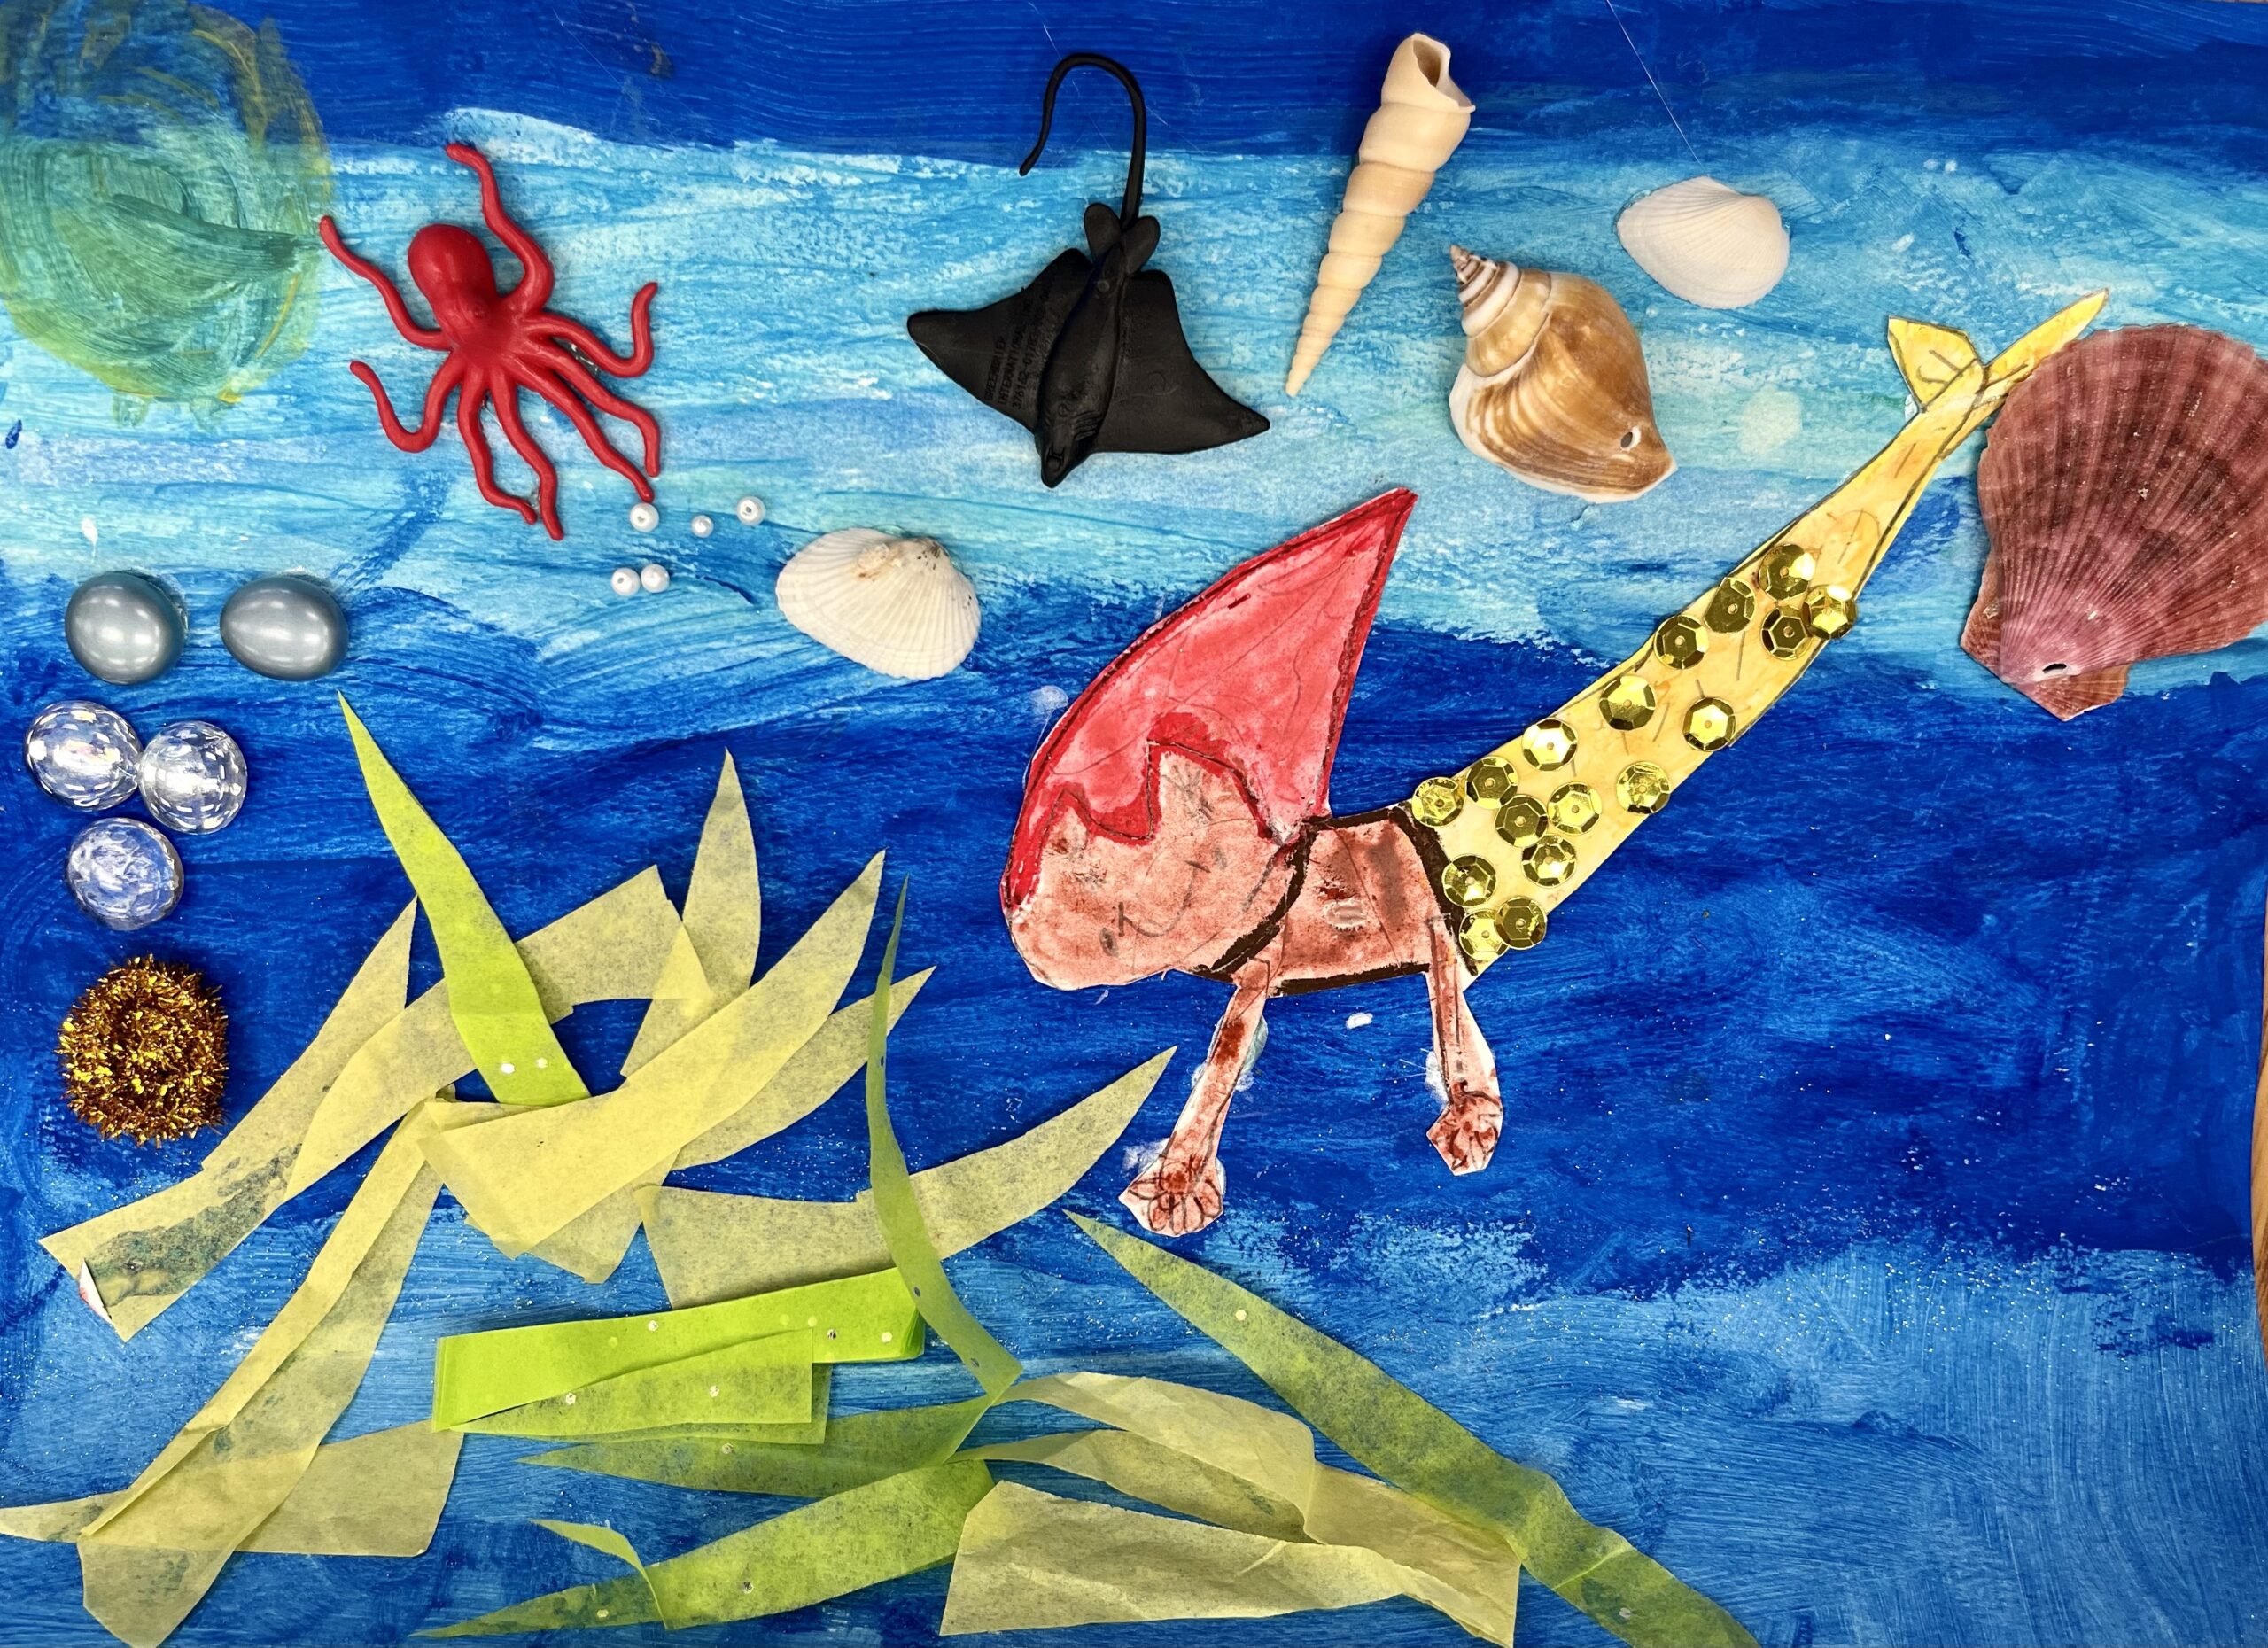 Artwork of mermaid with red hair in the ocean, surrounded by sea creatures, seaweed and seashells.